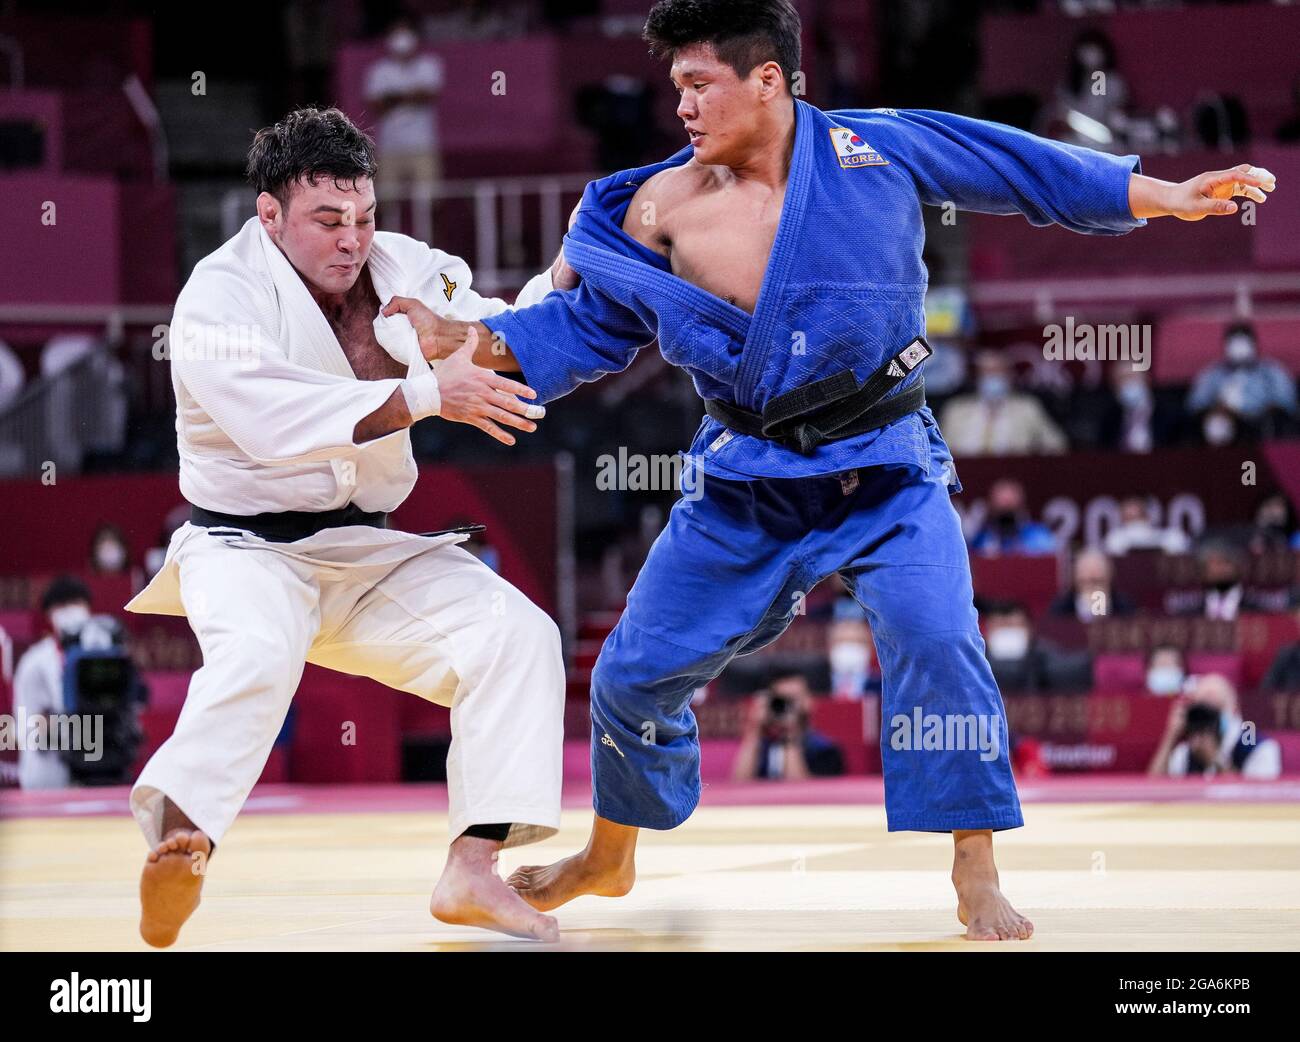 Tokyo, Japan. 29th July, 2021. Aaron Wolf (L) of Japan competes with Cho Guham of South Korea during their men's -100kg final match of judo at Tokyo 2020 Olympic Games in Tokyo, Japan, July 29, 2021. Credit: Liu Dawei/Xinhua/Alamy Live News Stock Photo